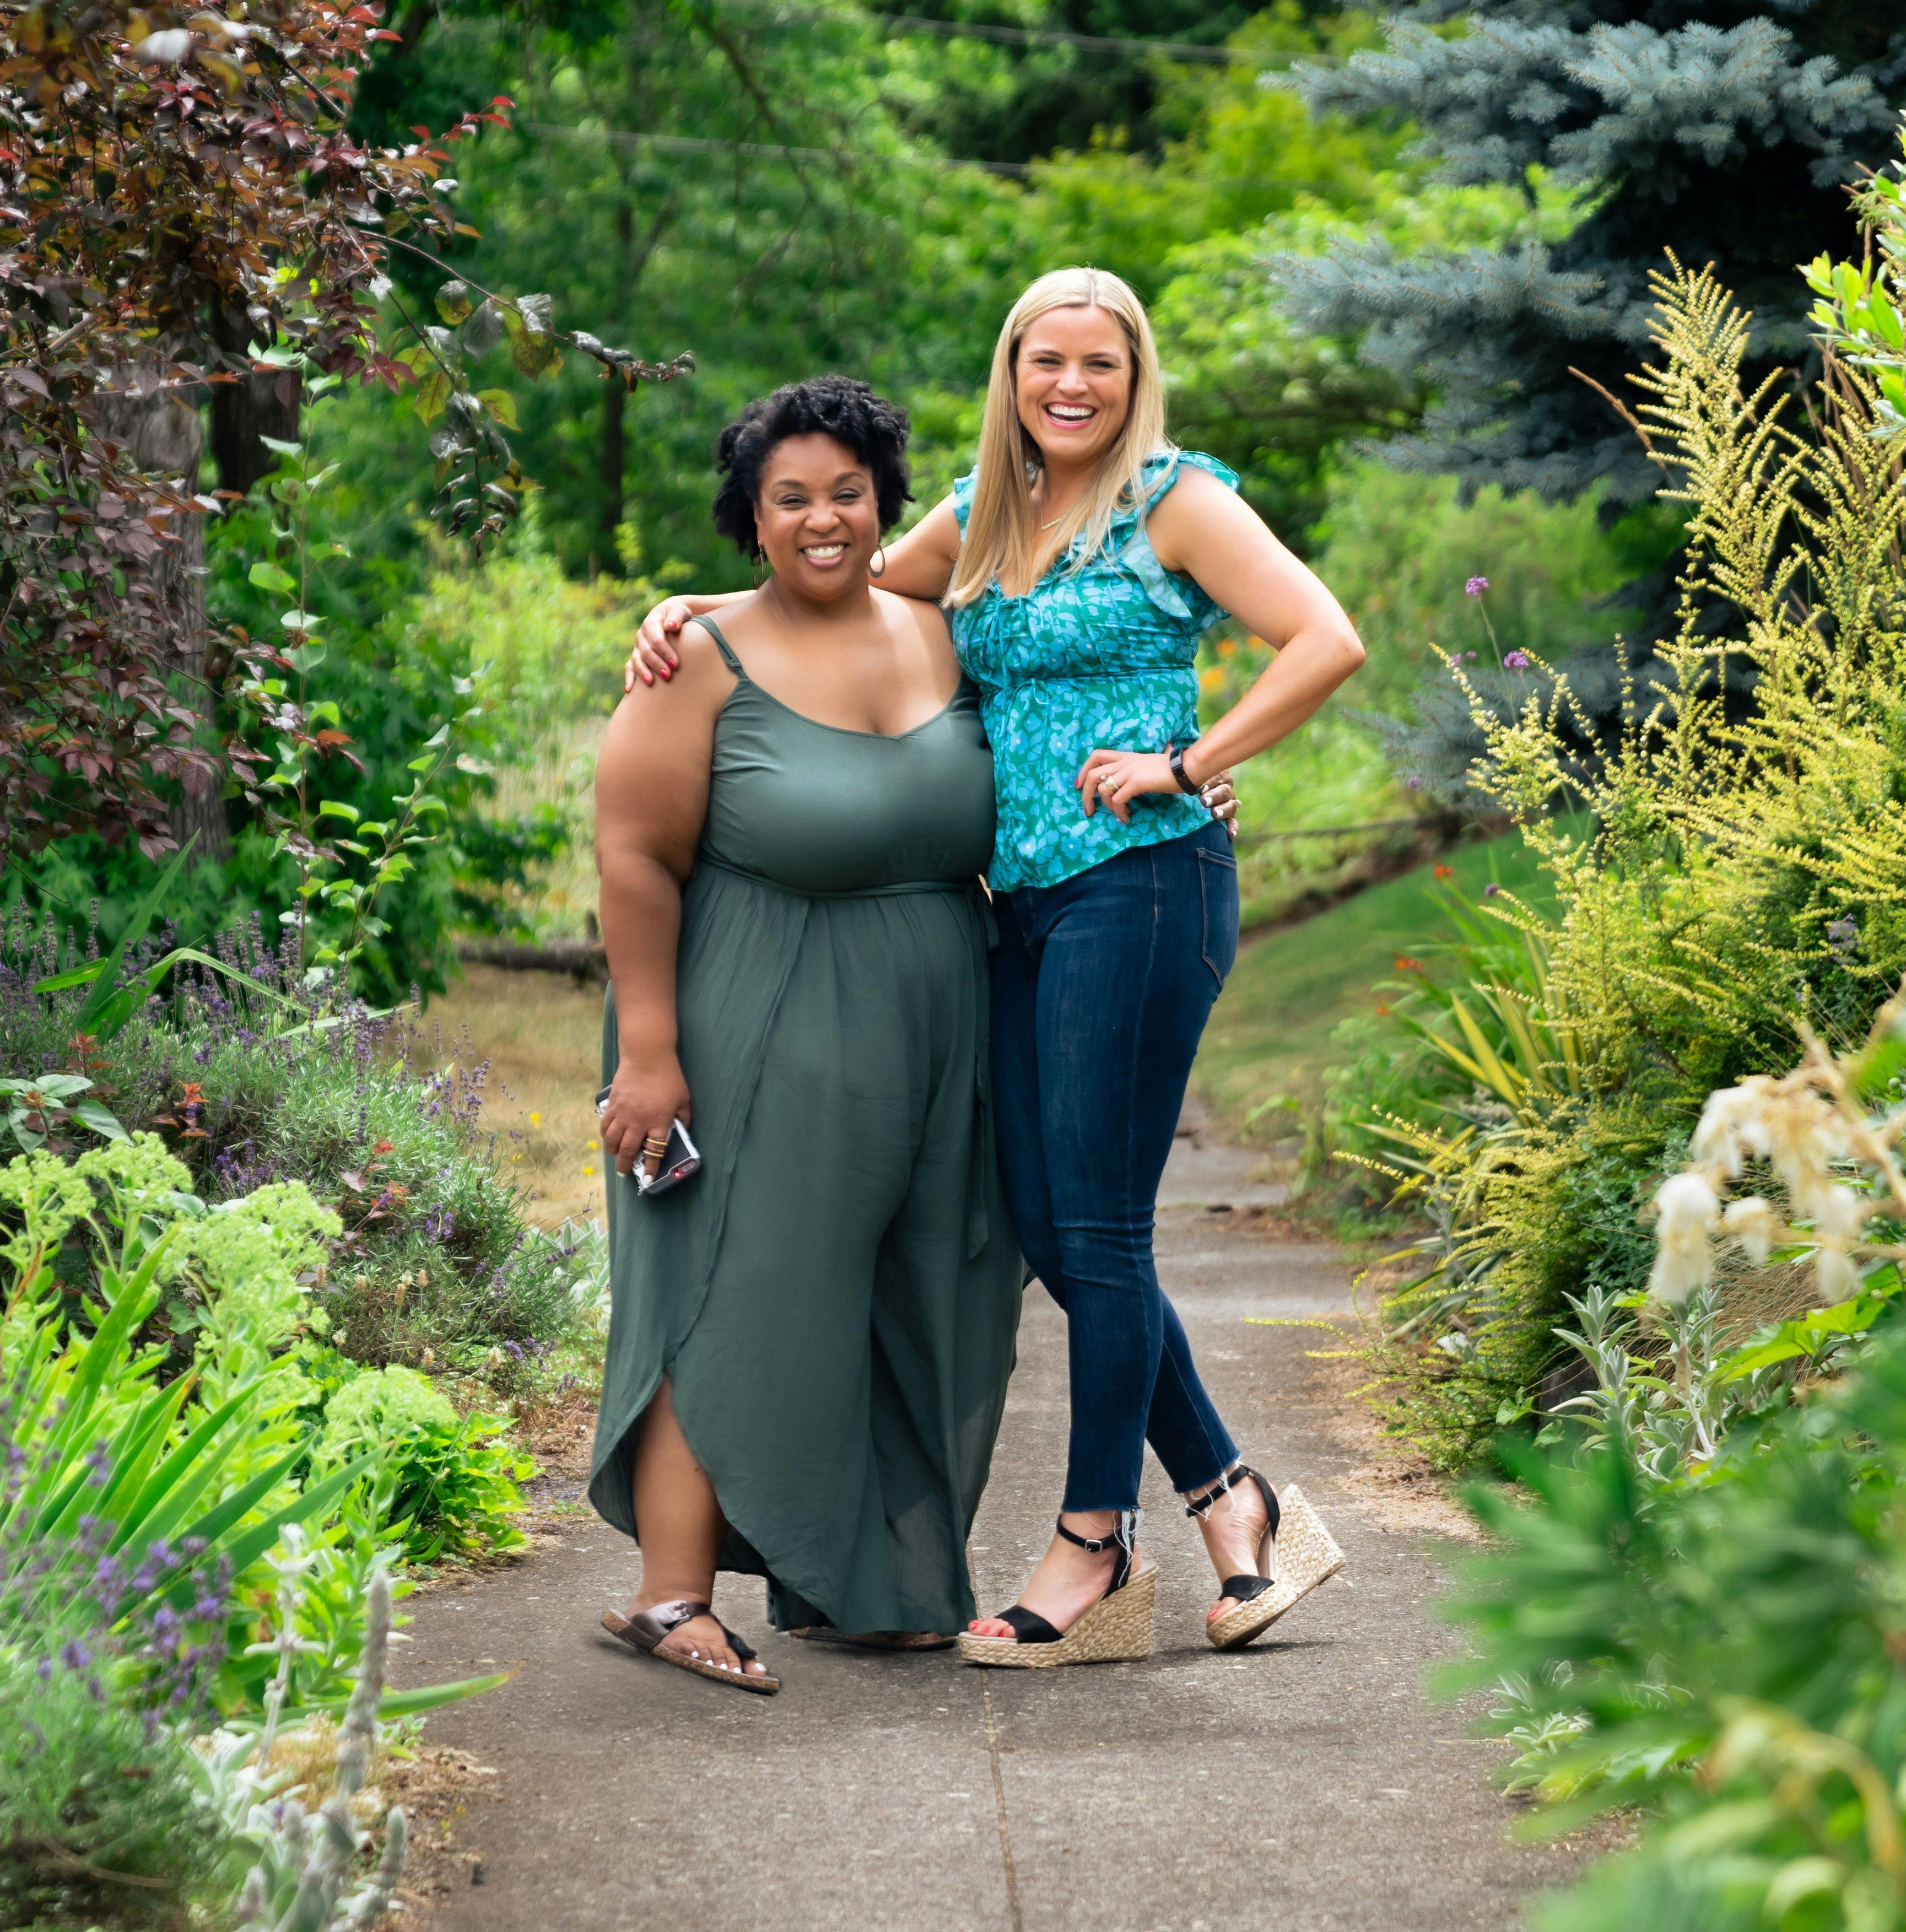 In 2017, 16 years after Tamika Felder (left) received a diagnosis of cervical cancer, Ginny Marable (right) began a similar cancer journey. Recently, Marable and her partner offered Felder and her husband their unused embryos to have a child. In July, Marable and Felder met for the first time. Here, they stand together in Portland, Oregon. 



Photo credit: Elyse Cosgrove from Torch Pictures